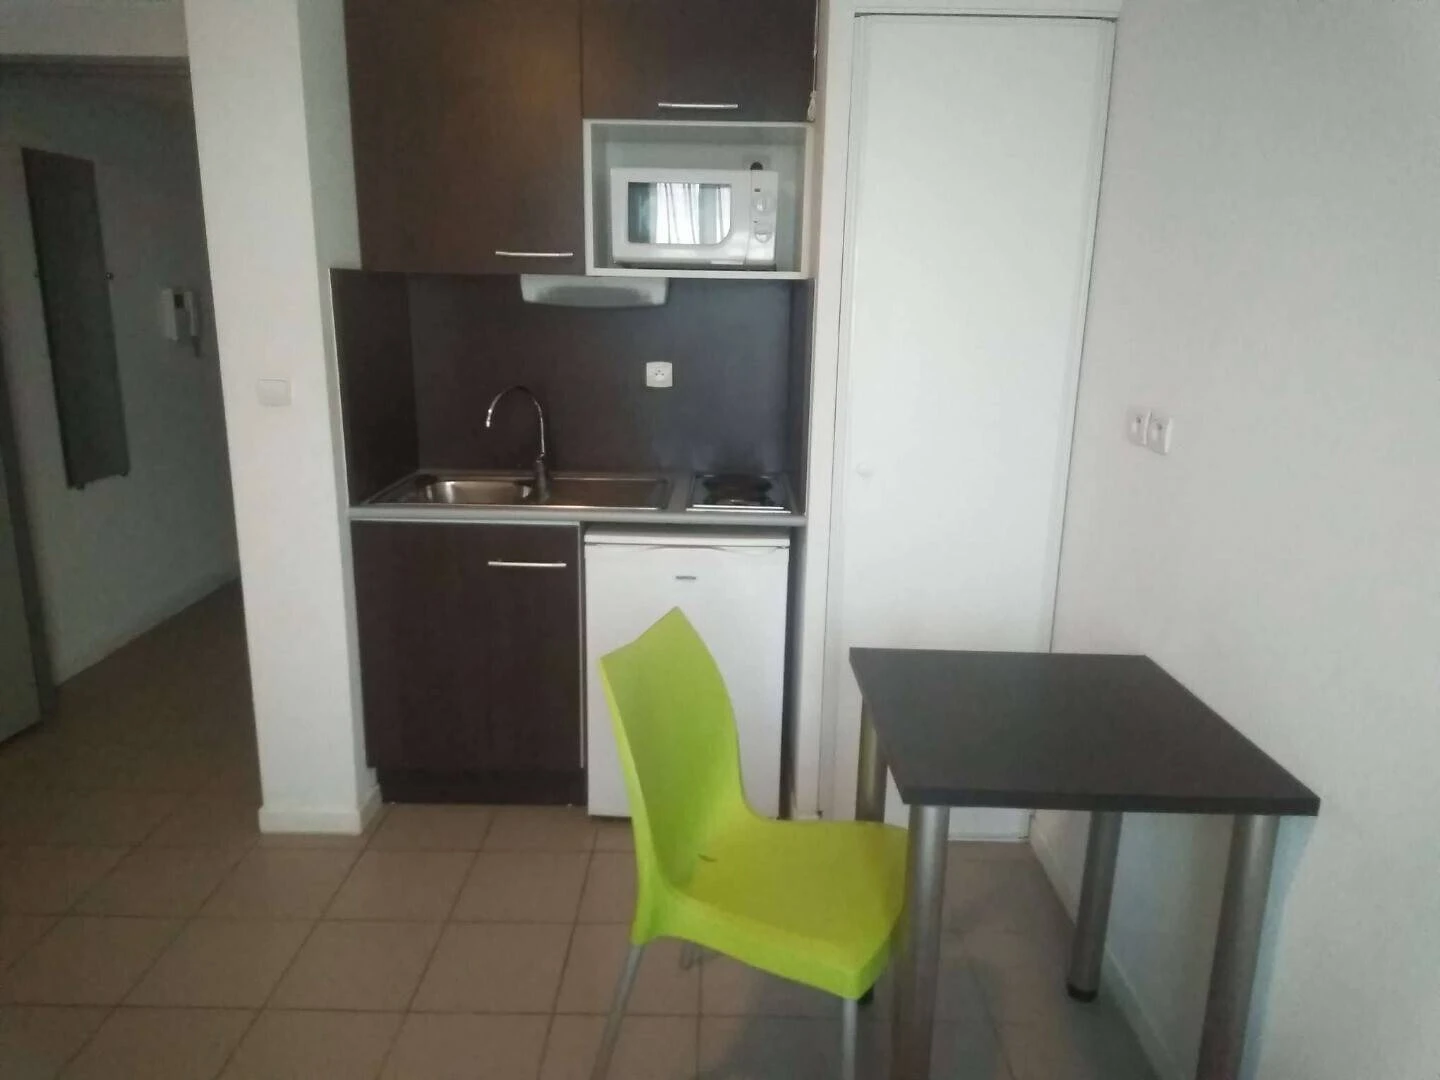 Room for rent in a shared flat in Avignon